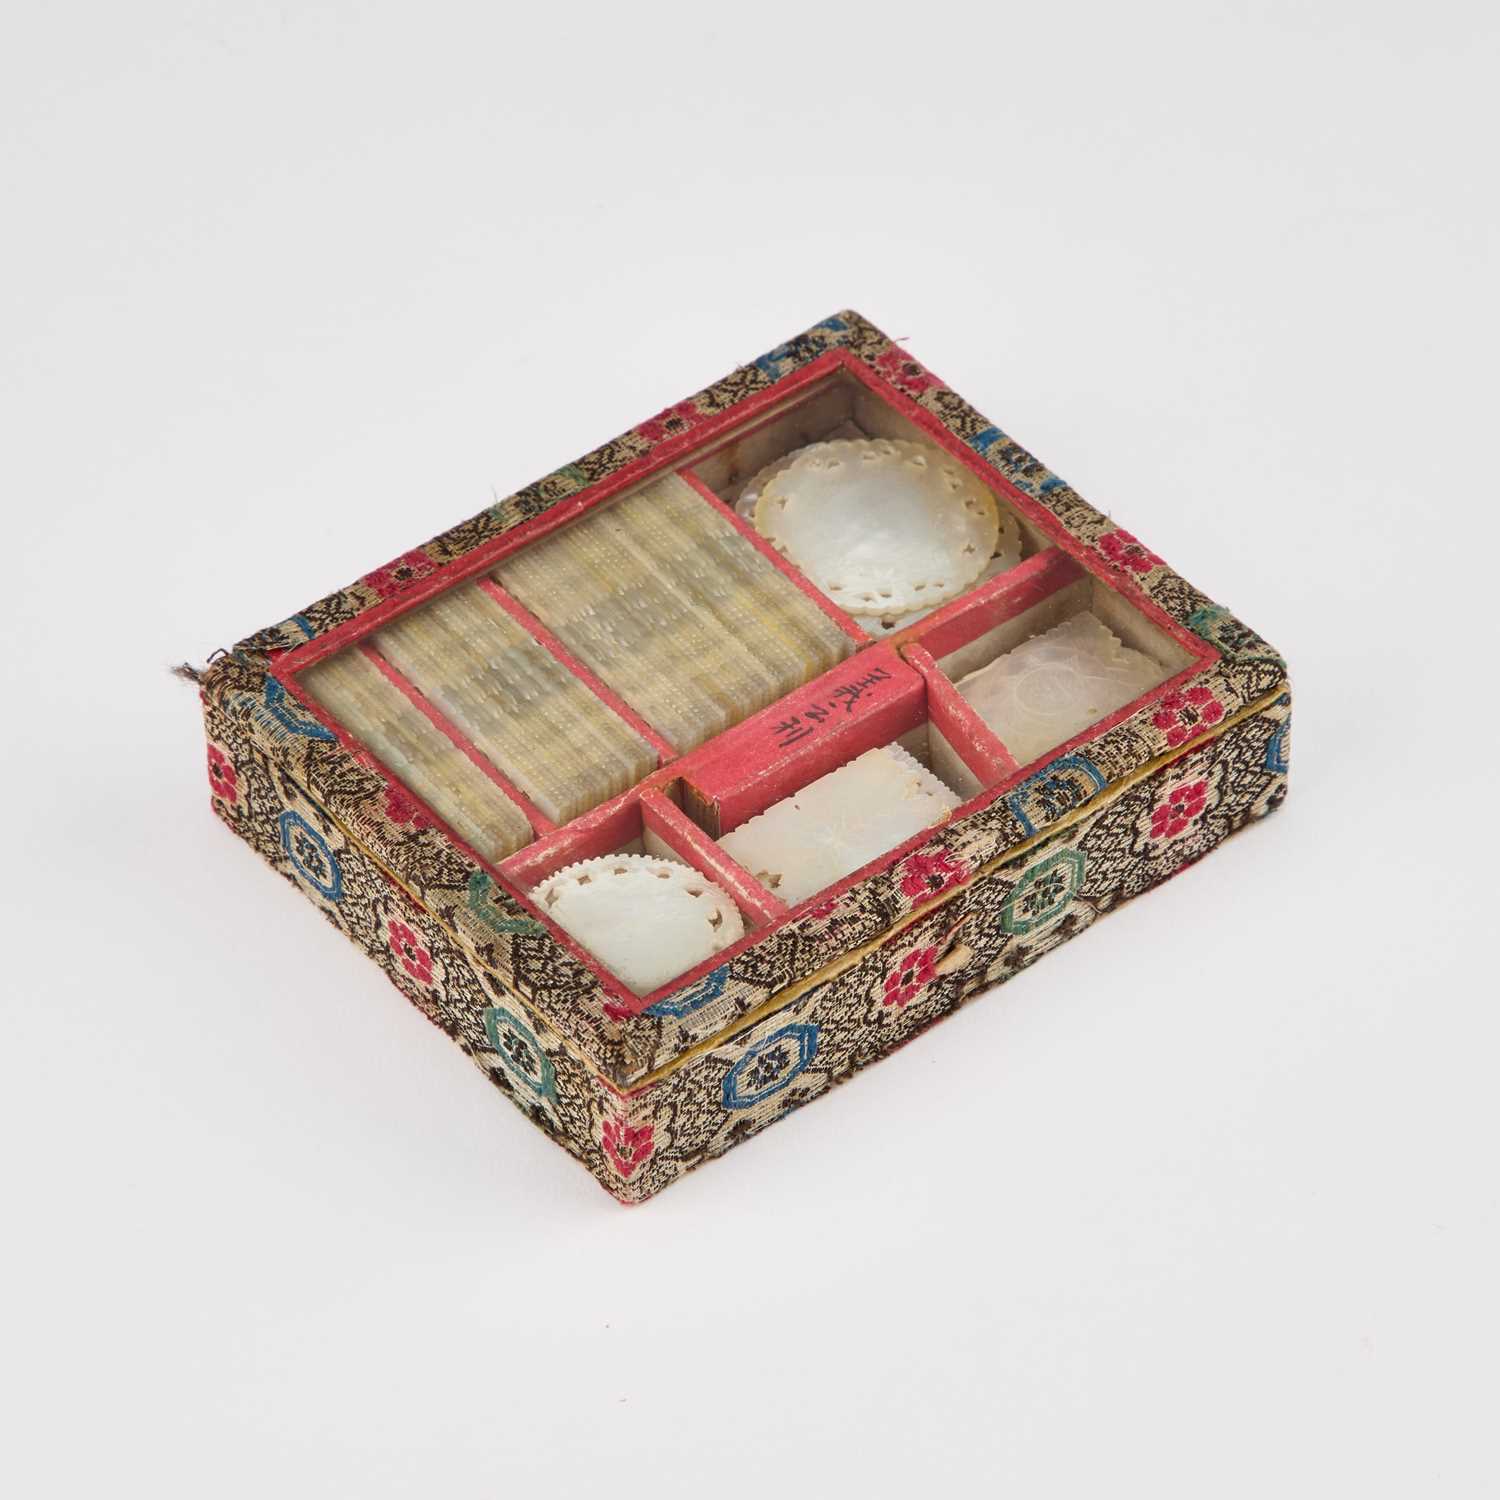 A LARGE COLLECTION OF 19TH CENTURY CHINESE MOTHER-OF-PEARL GAMING COUNTERS - Image 3 of 3